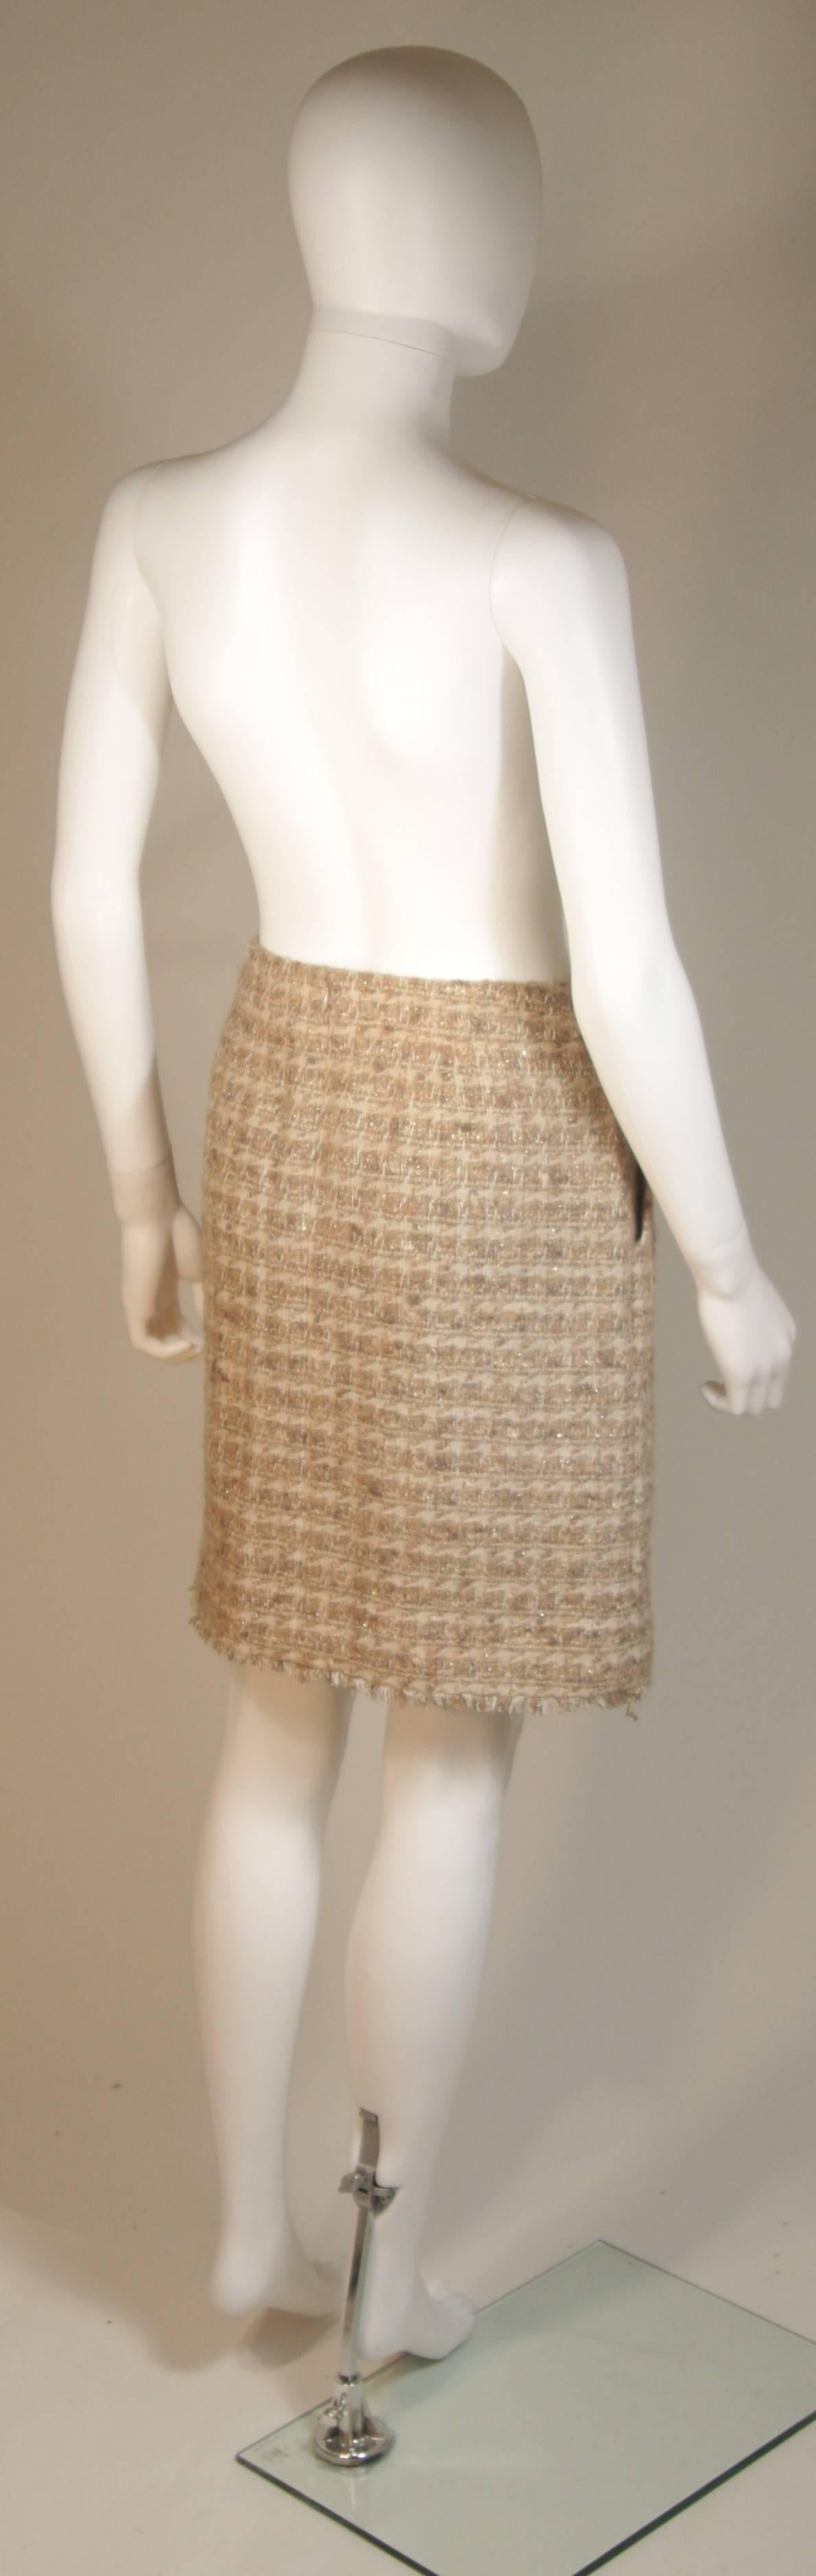 CHANEL Nude Tweed Knee Length Skirt with Brown Metallic Detail Size 6-8 4